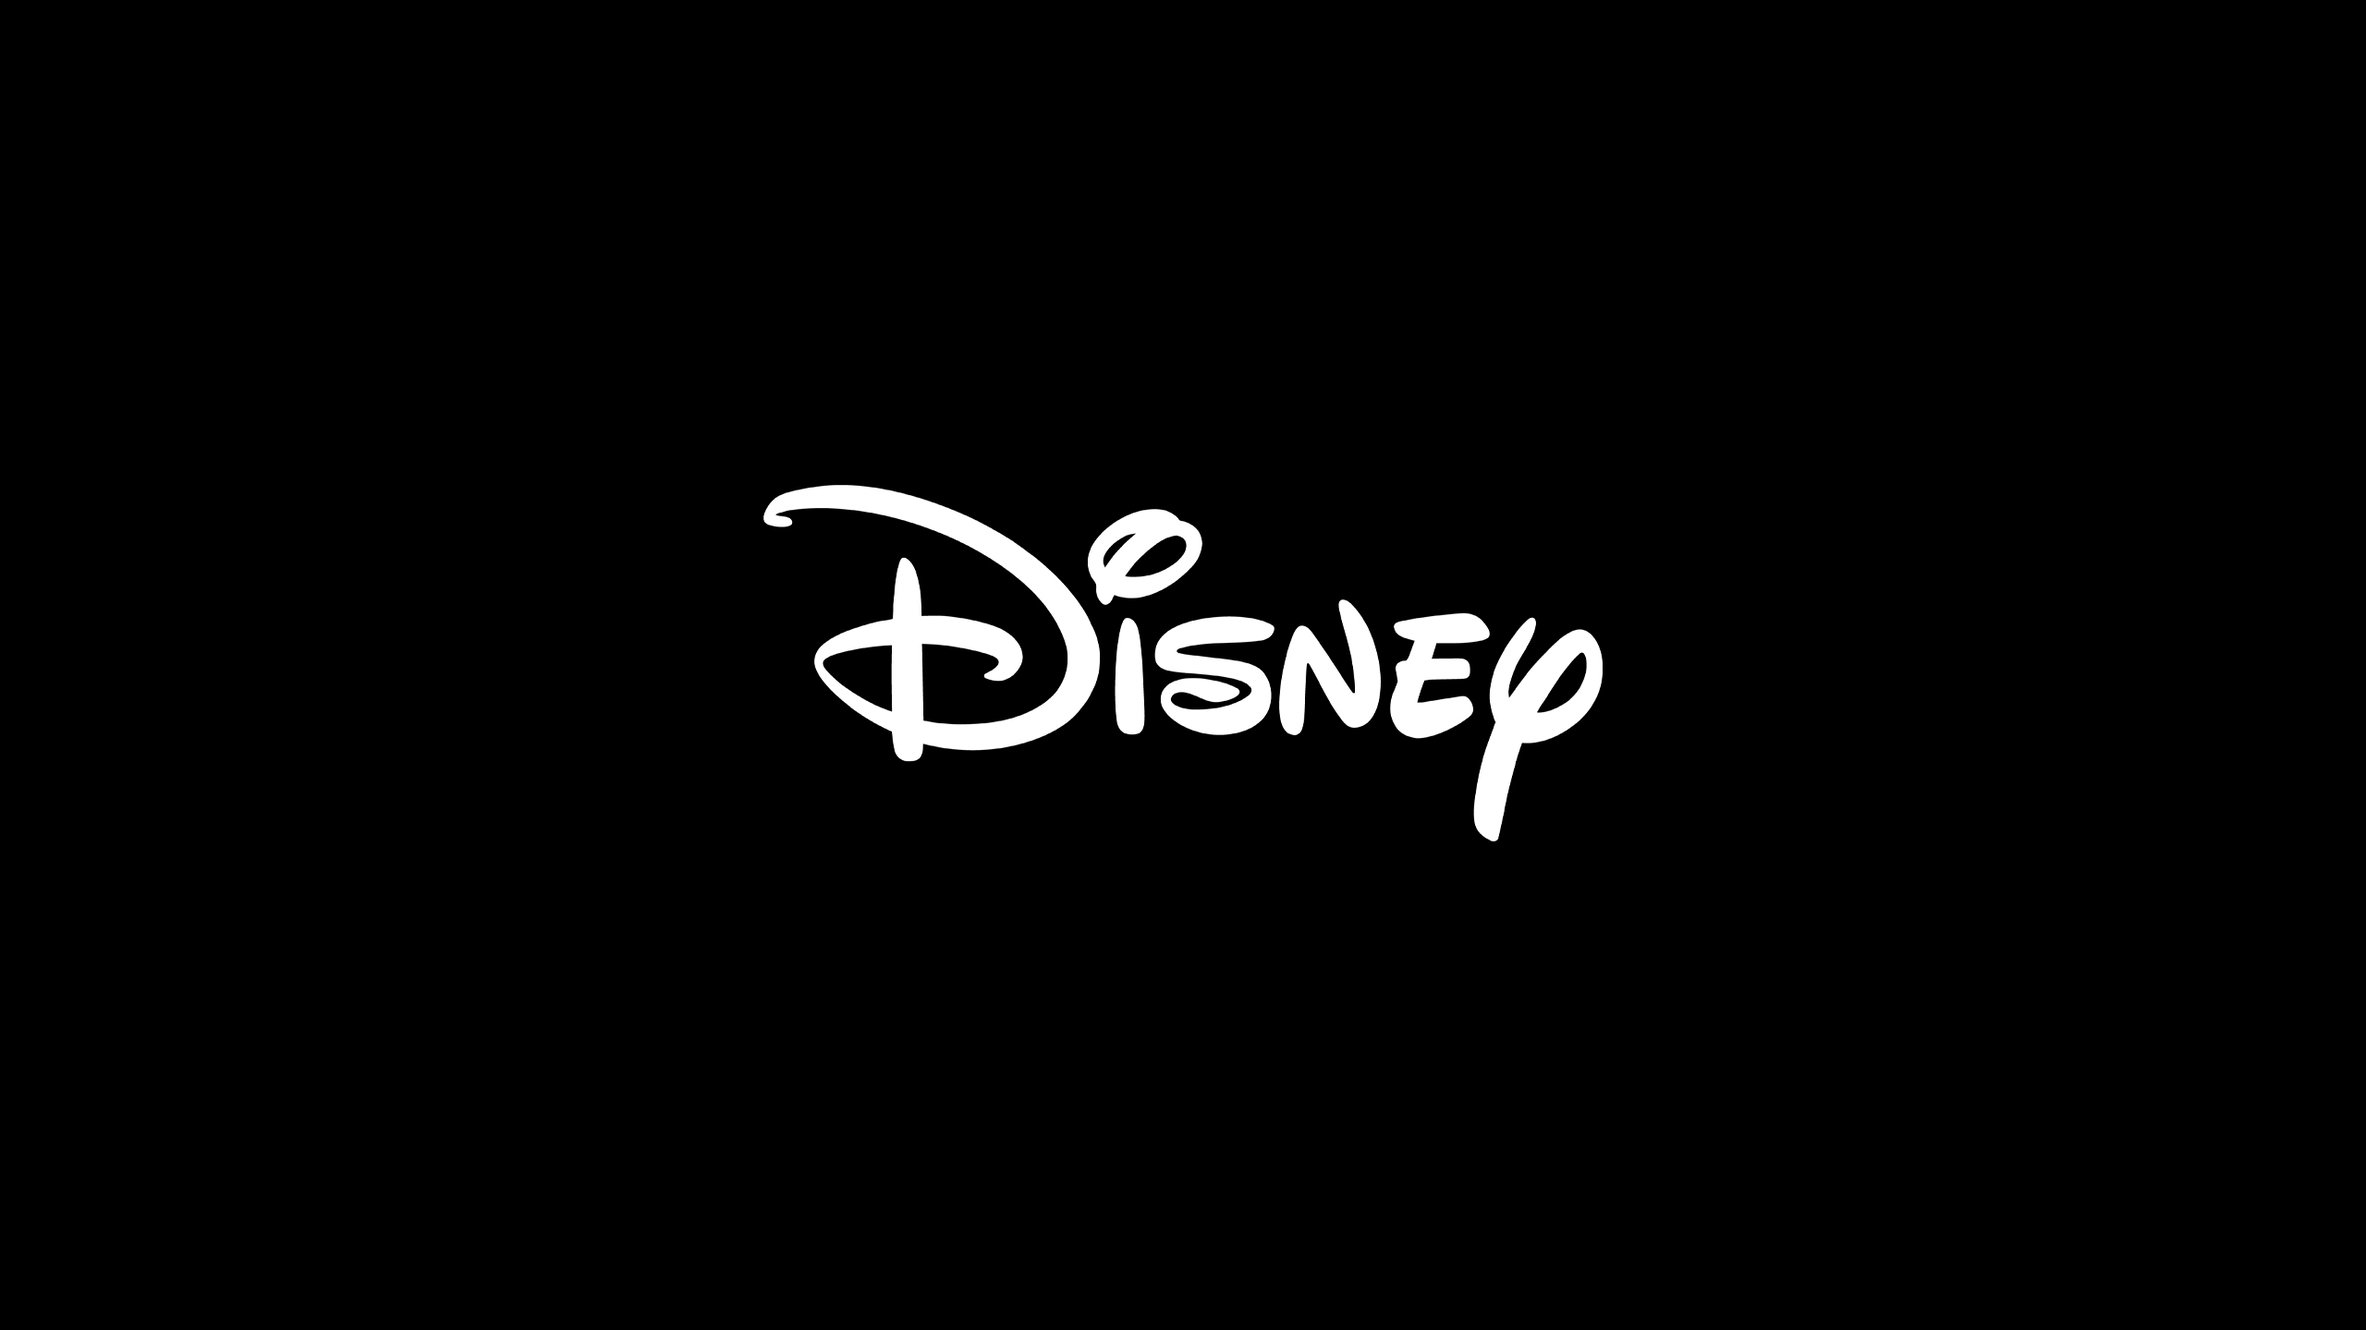 Undisclosed Disney Live Action Feature Casting Worldwide!!